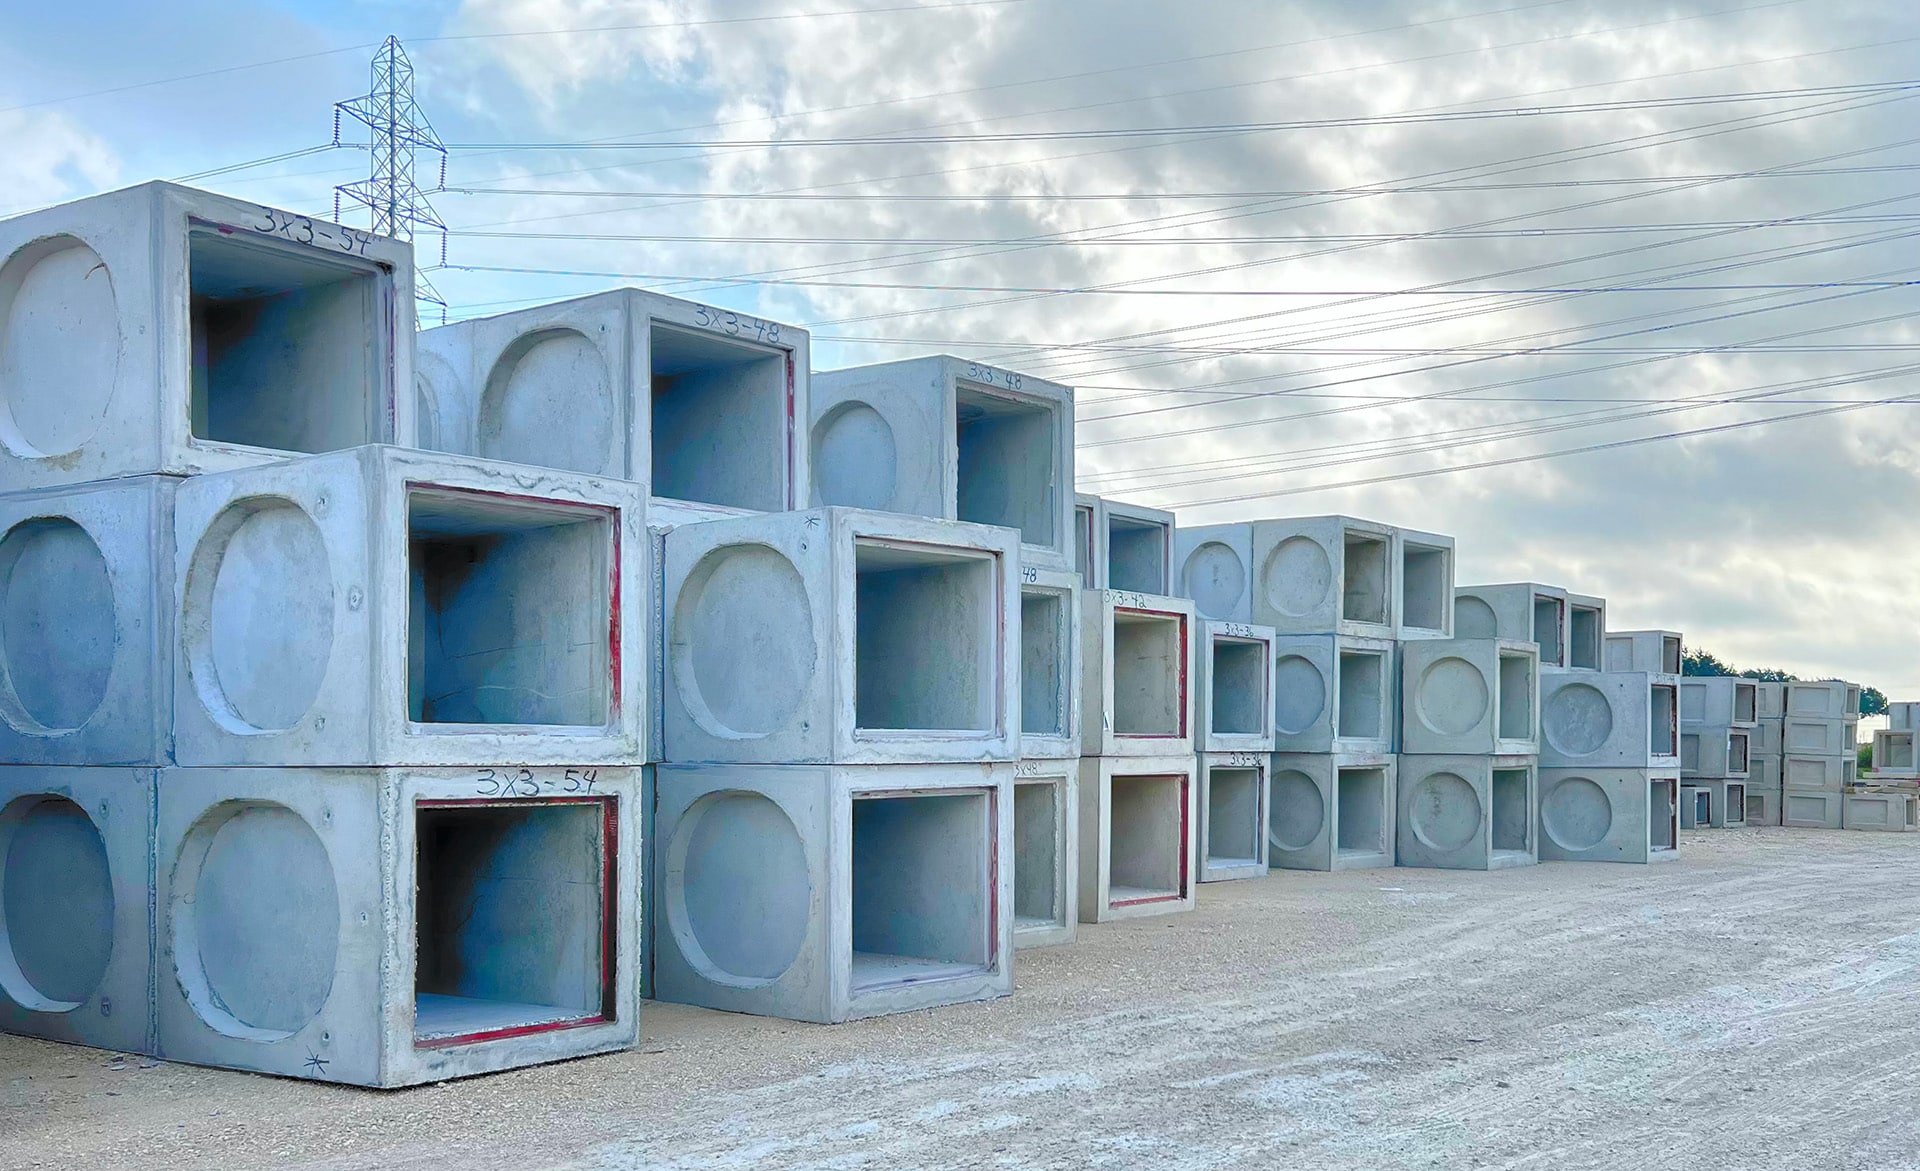 concrete boxes stacked in an outdoor area